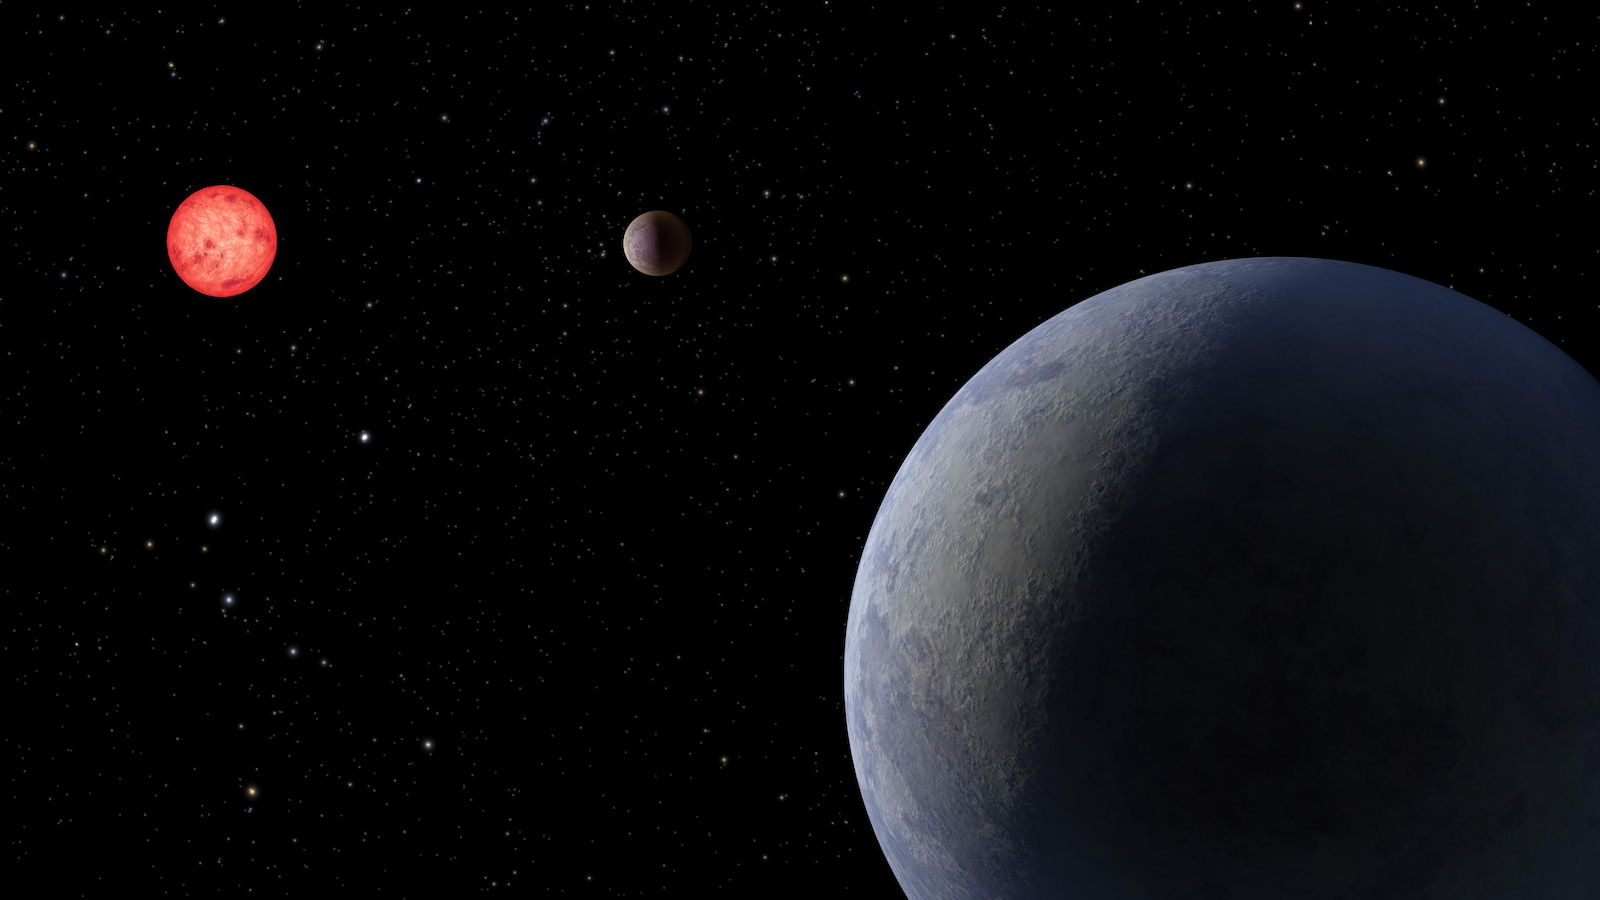 slide 1 - Illustration showing a super-Earth, LP 890-9 c, in the foreground, its sister planet LP 890-9 b farther away, both orbiting a red-dwarf star.